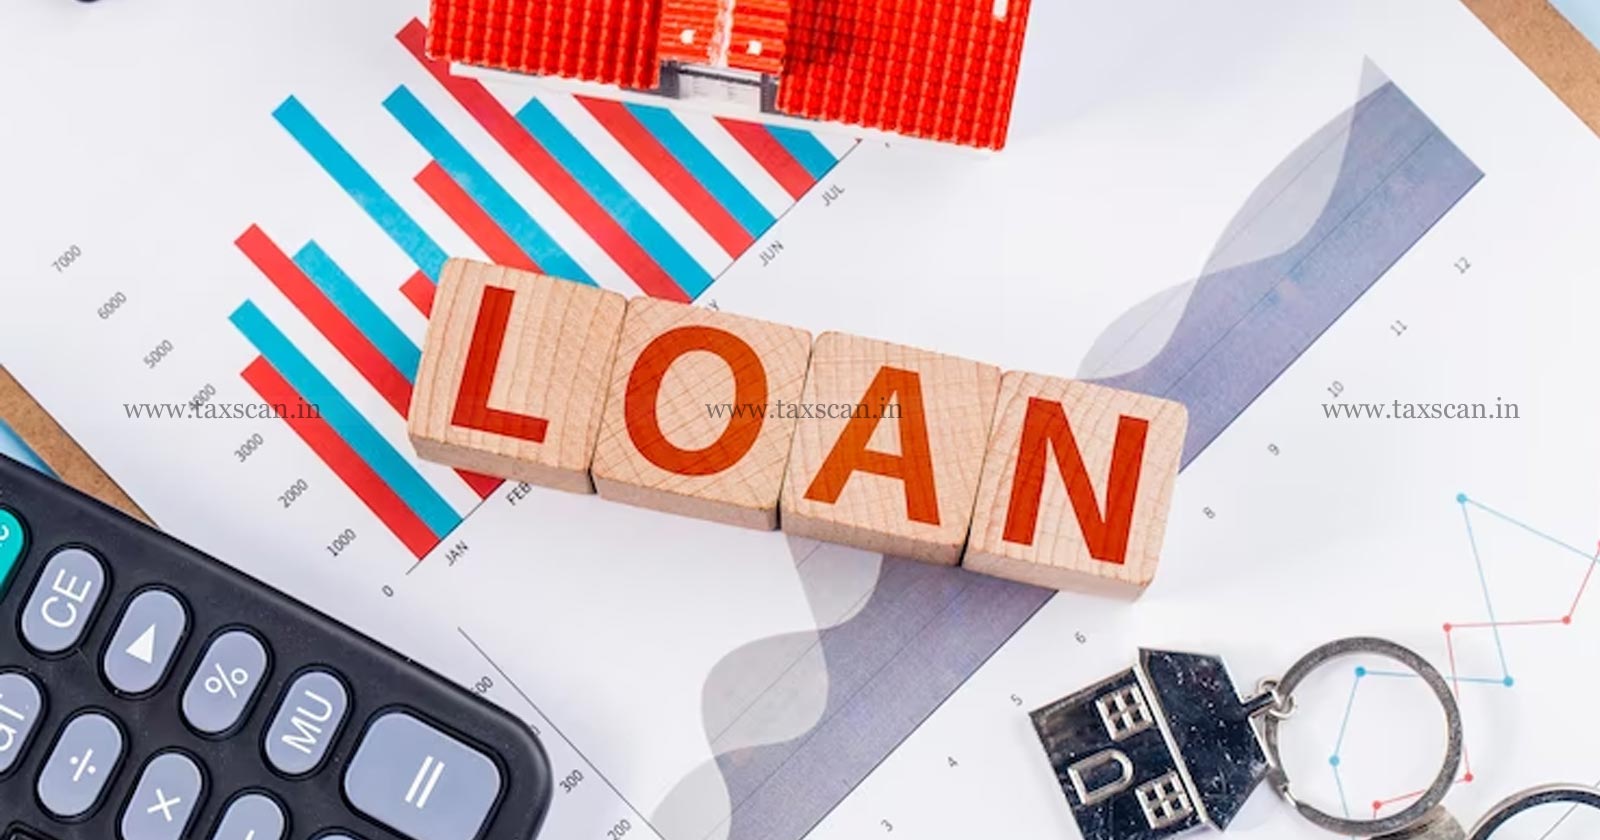 Loan - Taken - Higher - Rate - for - Commercial - Expediency - Admissible - Section - 57(iii) - ITAT - TAXSCAN